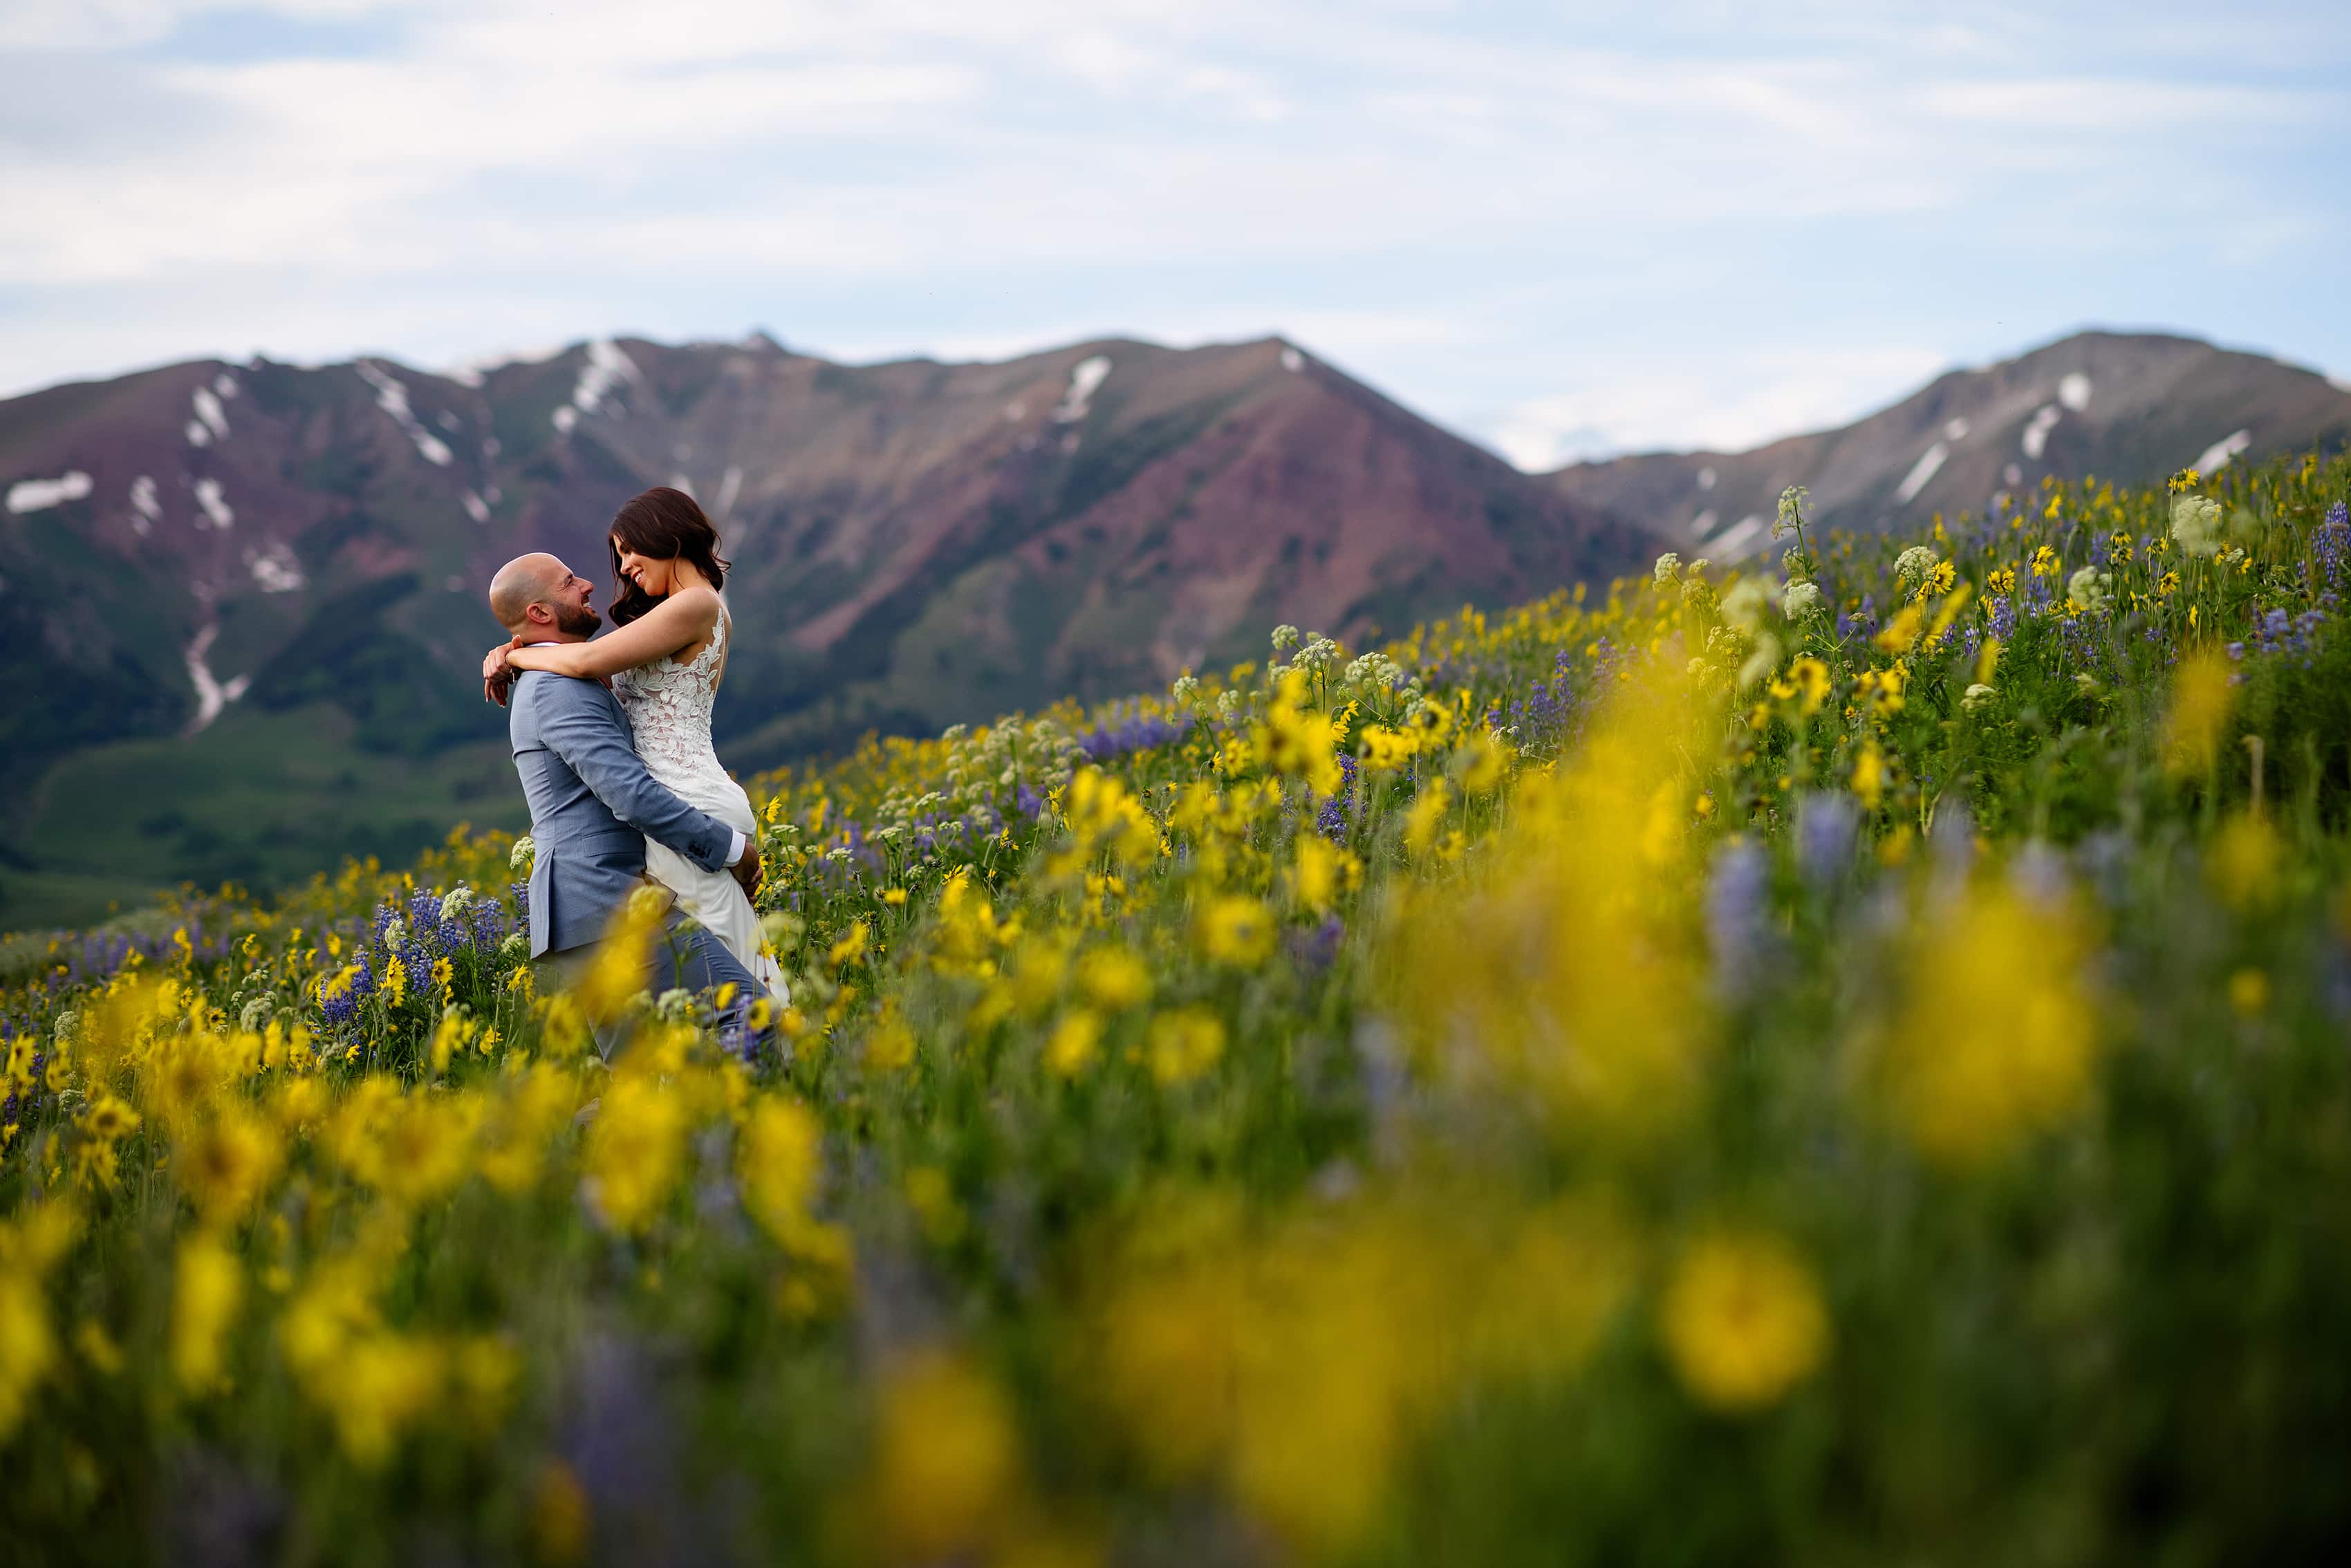 Michael and Sarah embrace on the side of a mountain in a field of daises in Crested Butte